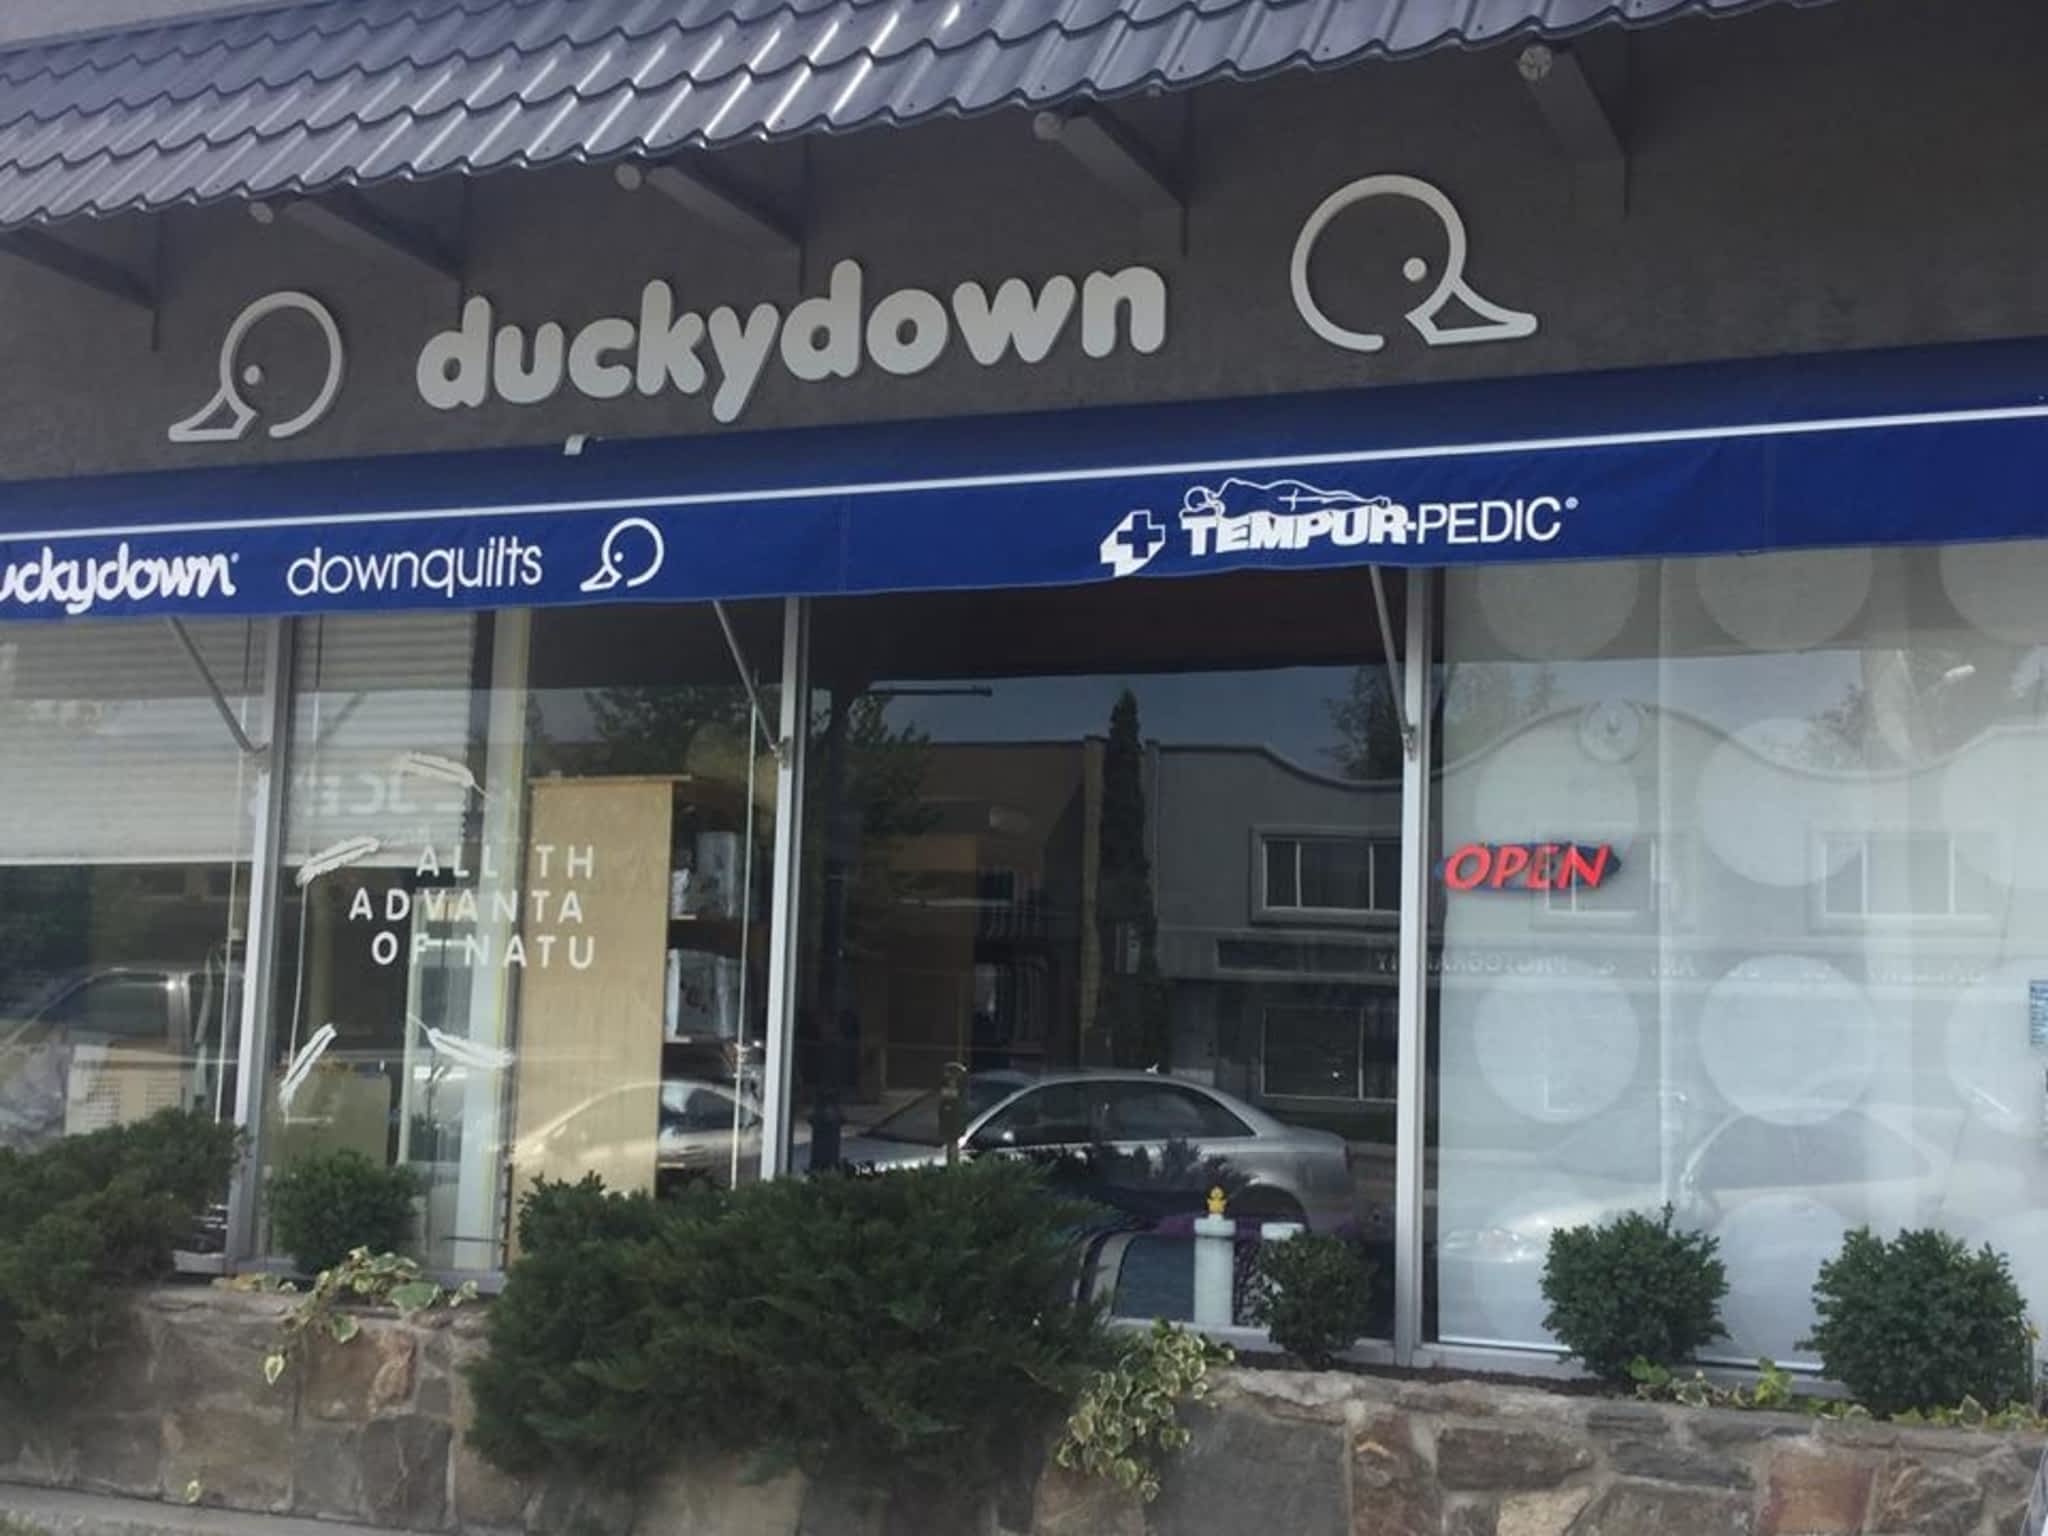 photo Ducky Down Downquilts Inc